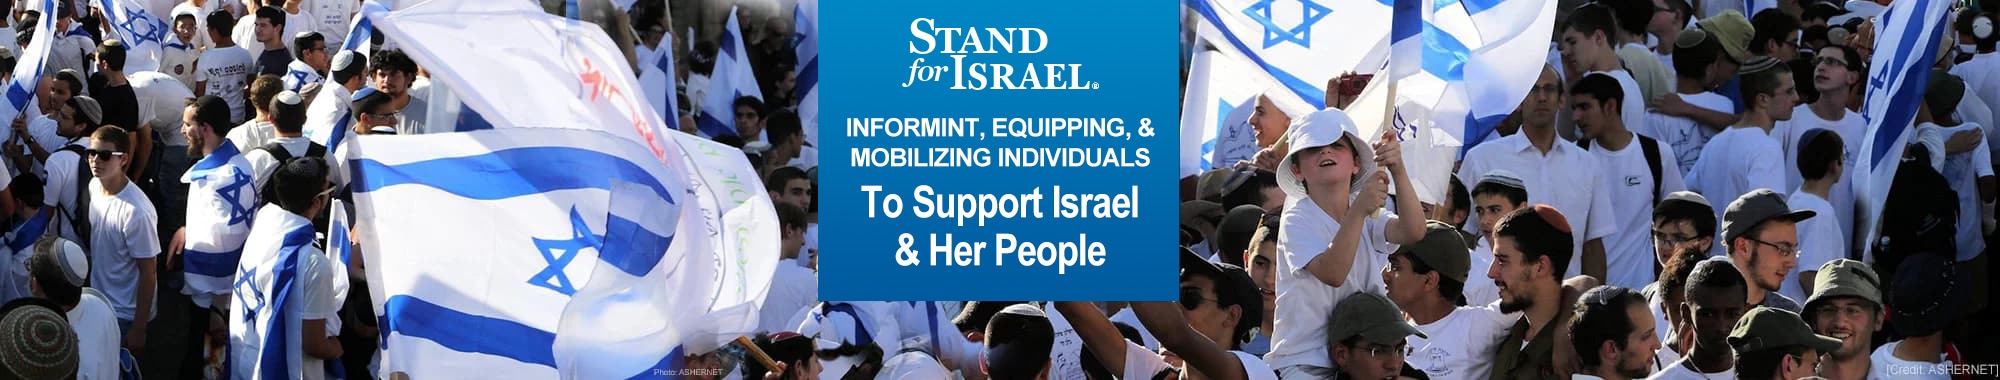 Banner image for IFCJ's Stand for Israel blog. Get up-to-date information on hot topics in Israel current news.